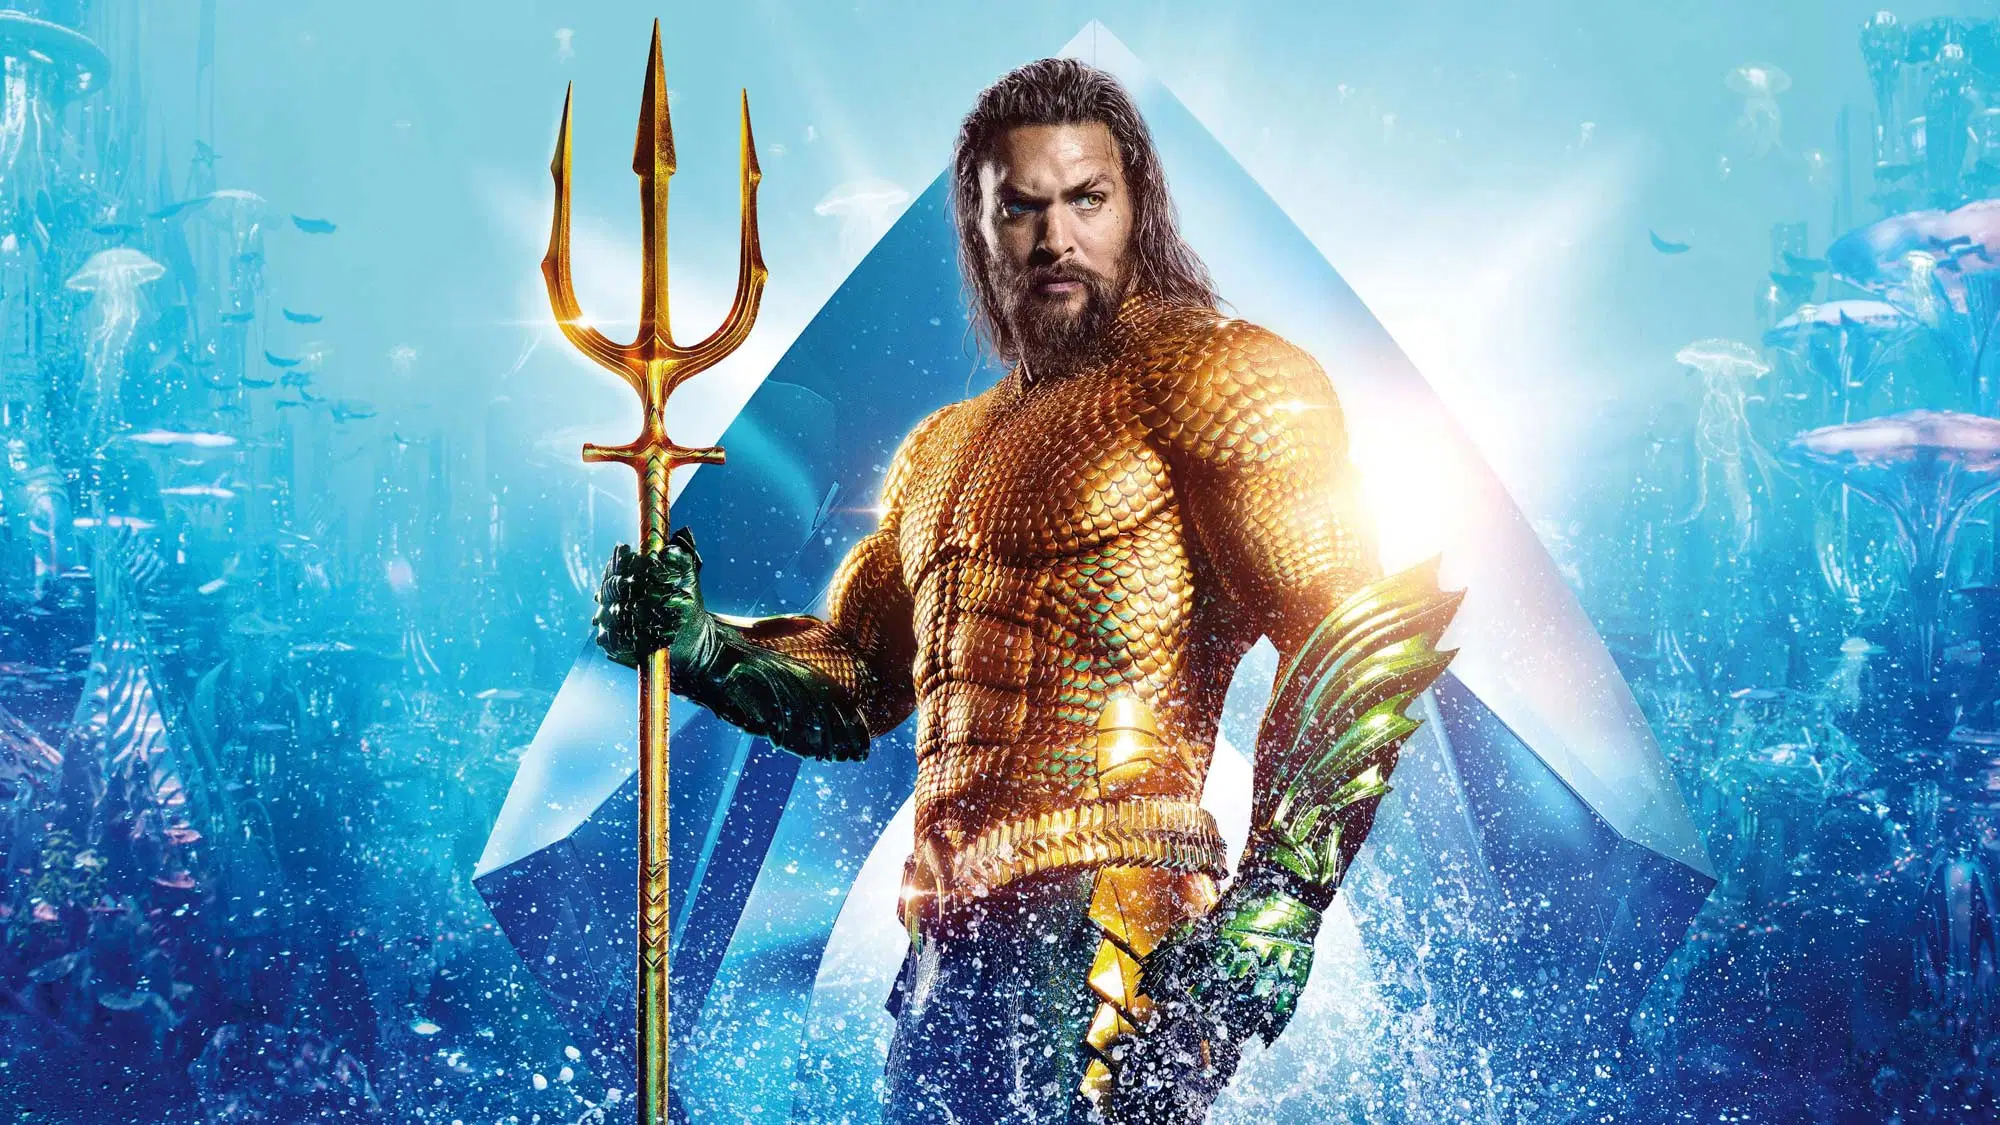 An image of Jason Momoa in the movie Aquaman